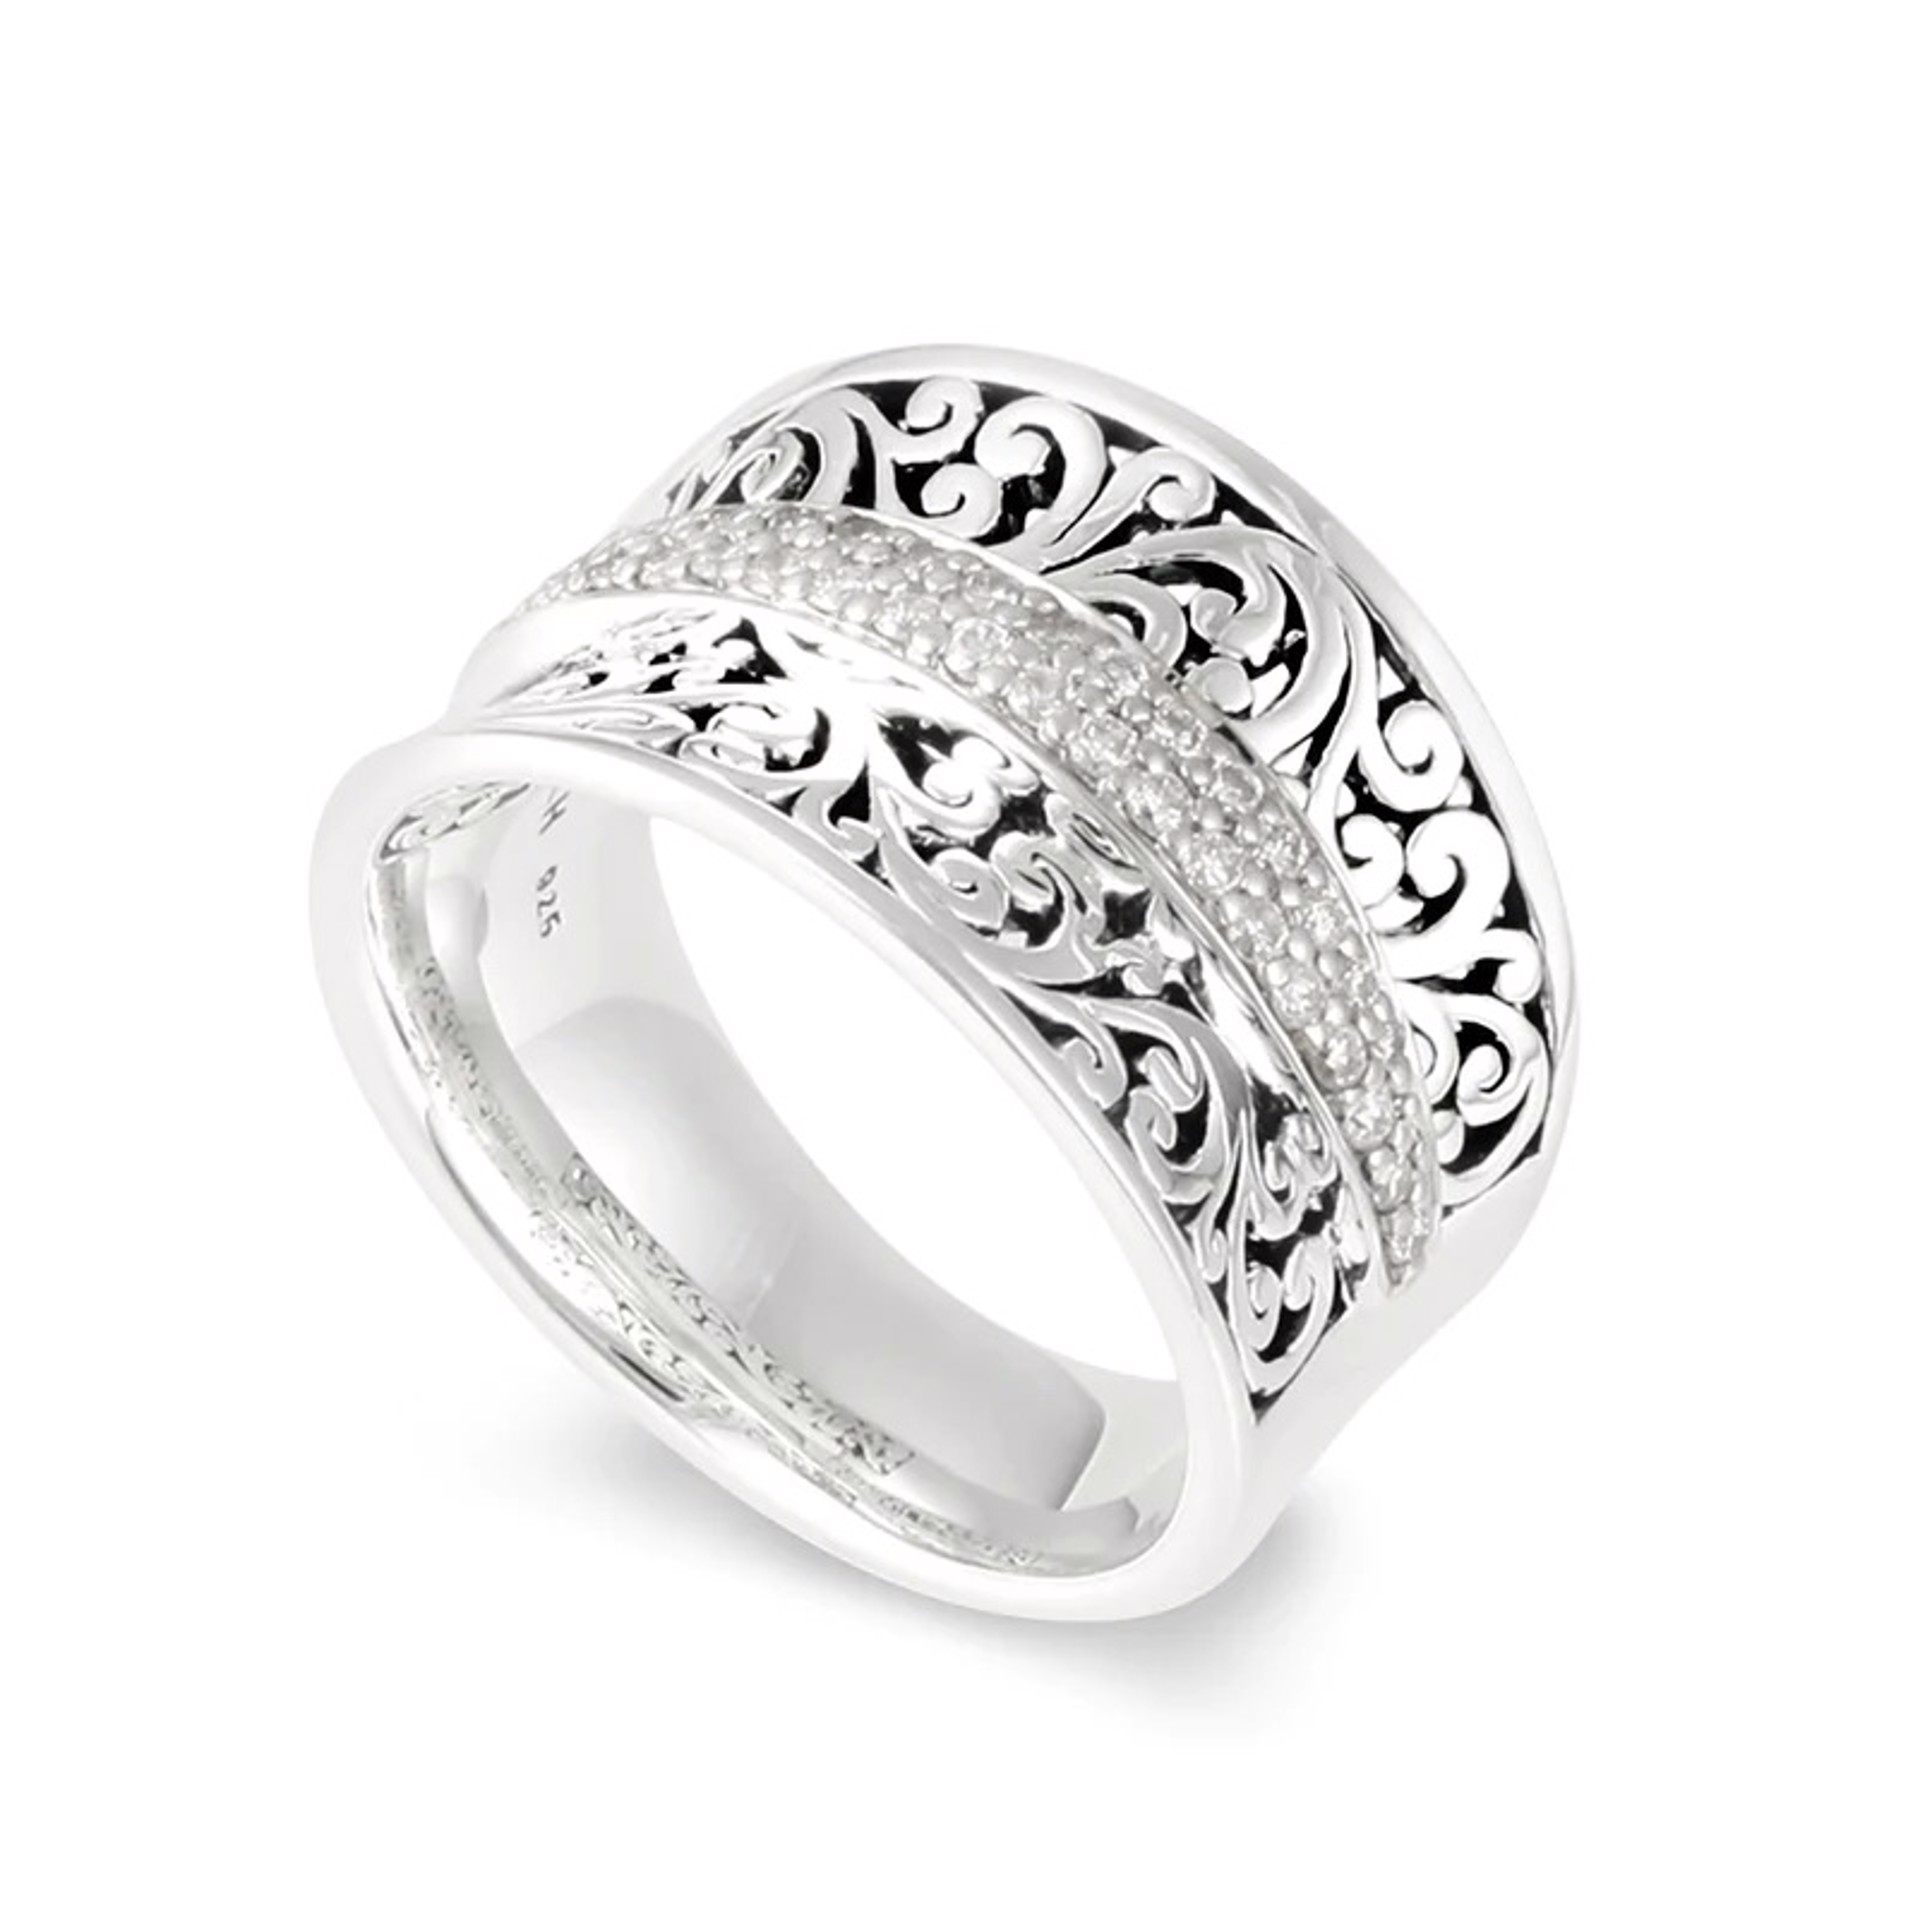 1009 Signature Scroll Open Ring with White Diamonds (SO) by Lois Hill